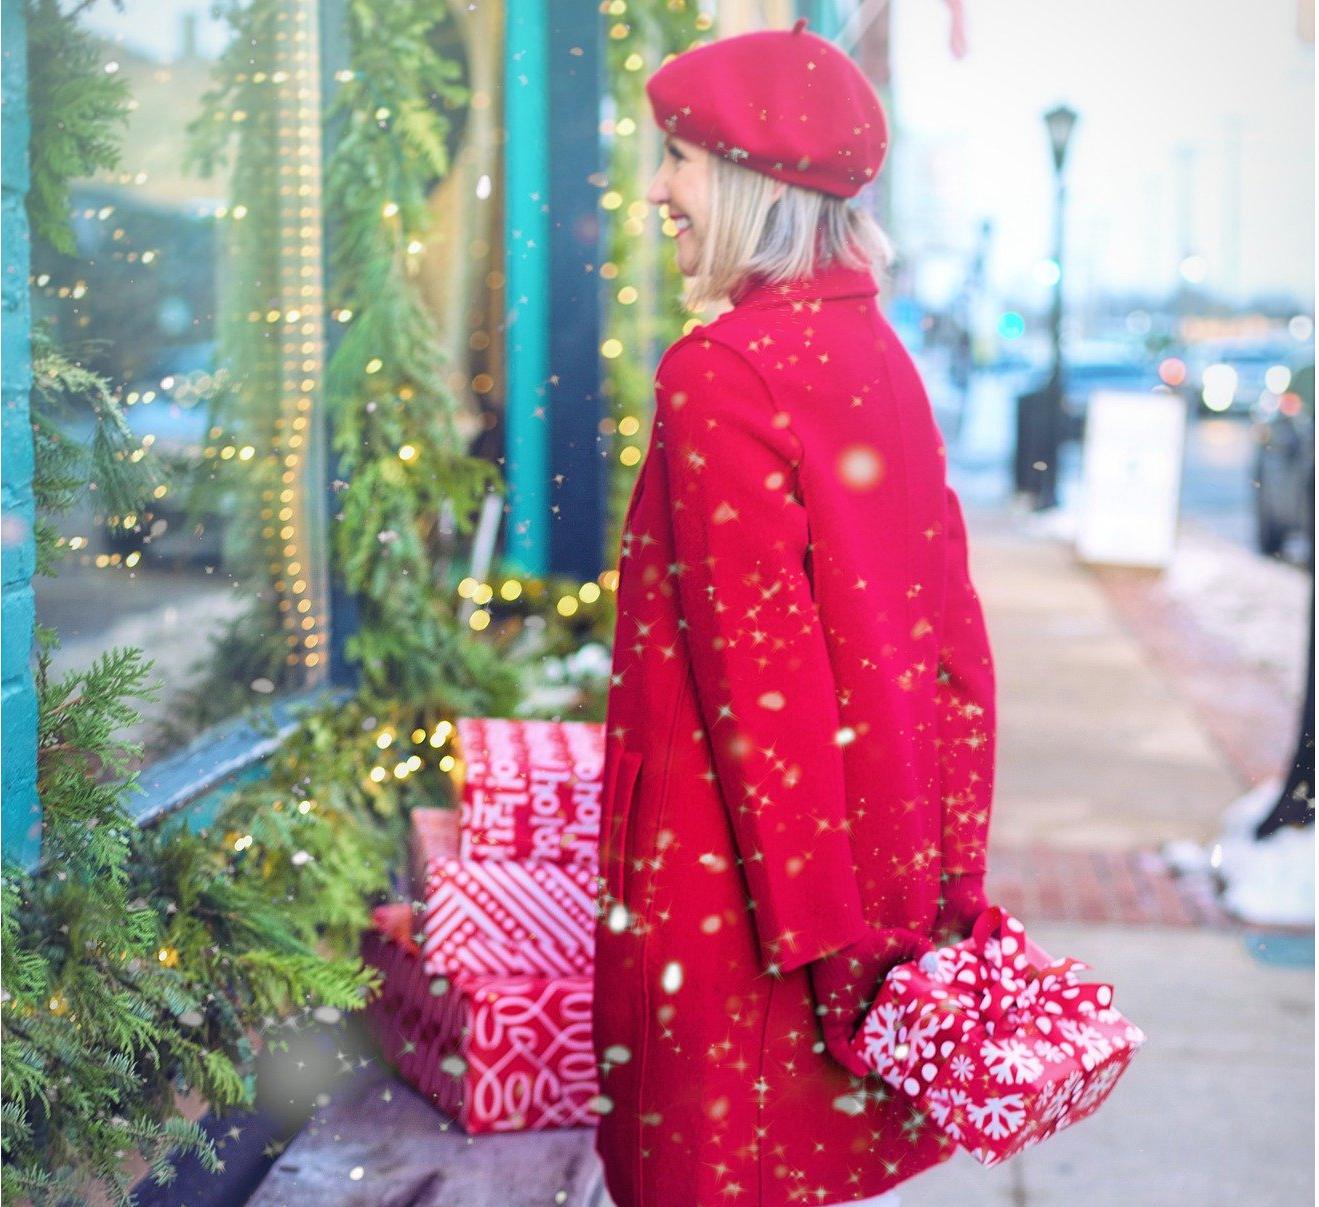 Woman in a red jacket and hat holding a wrapped present behind her back. She is outside on a snowy day looking in a store window that is decorated for the holidays.